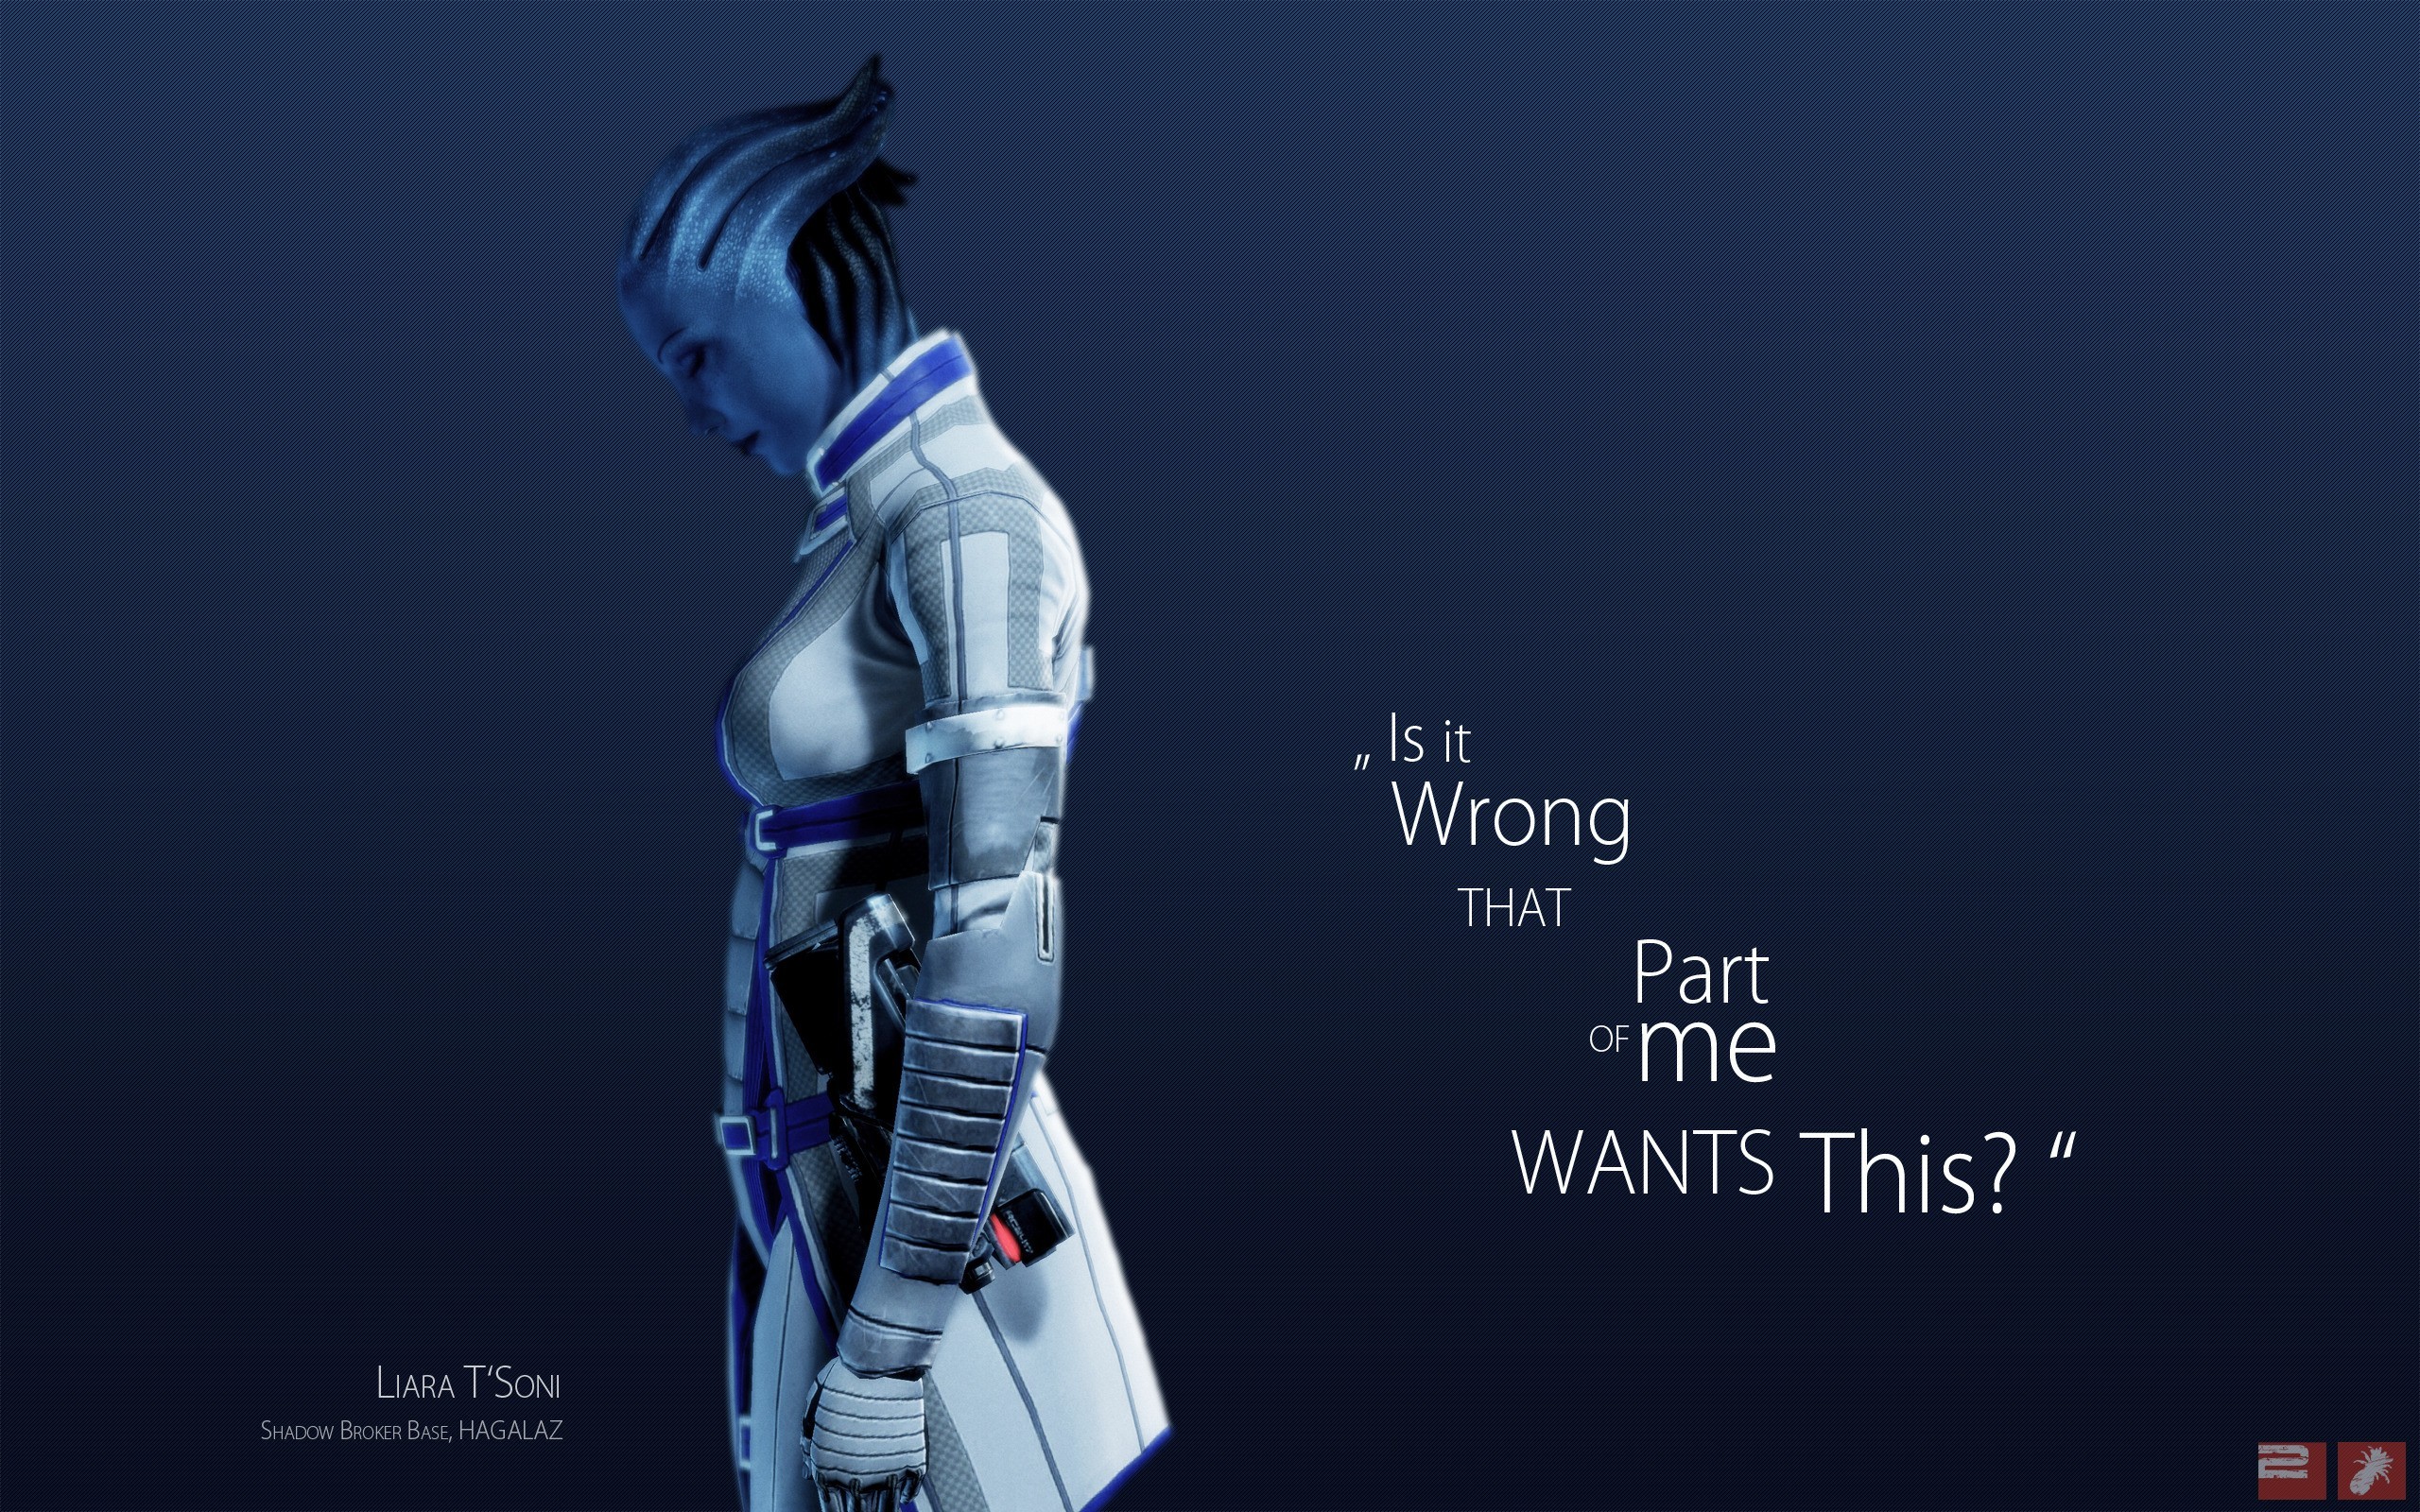 Mass Effect Mass Effect 2 Mass Effect 3 Video Games Blue Skin Quote 2560x1600